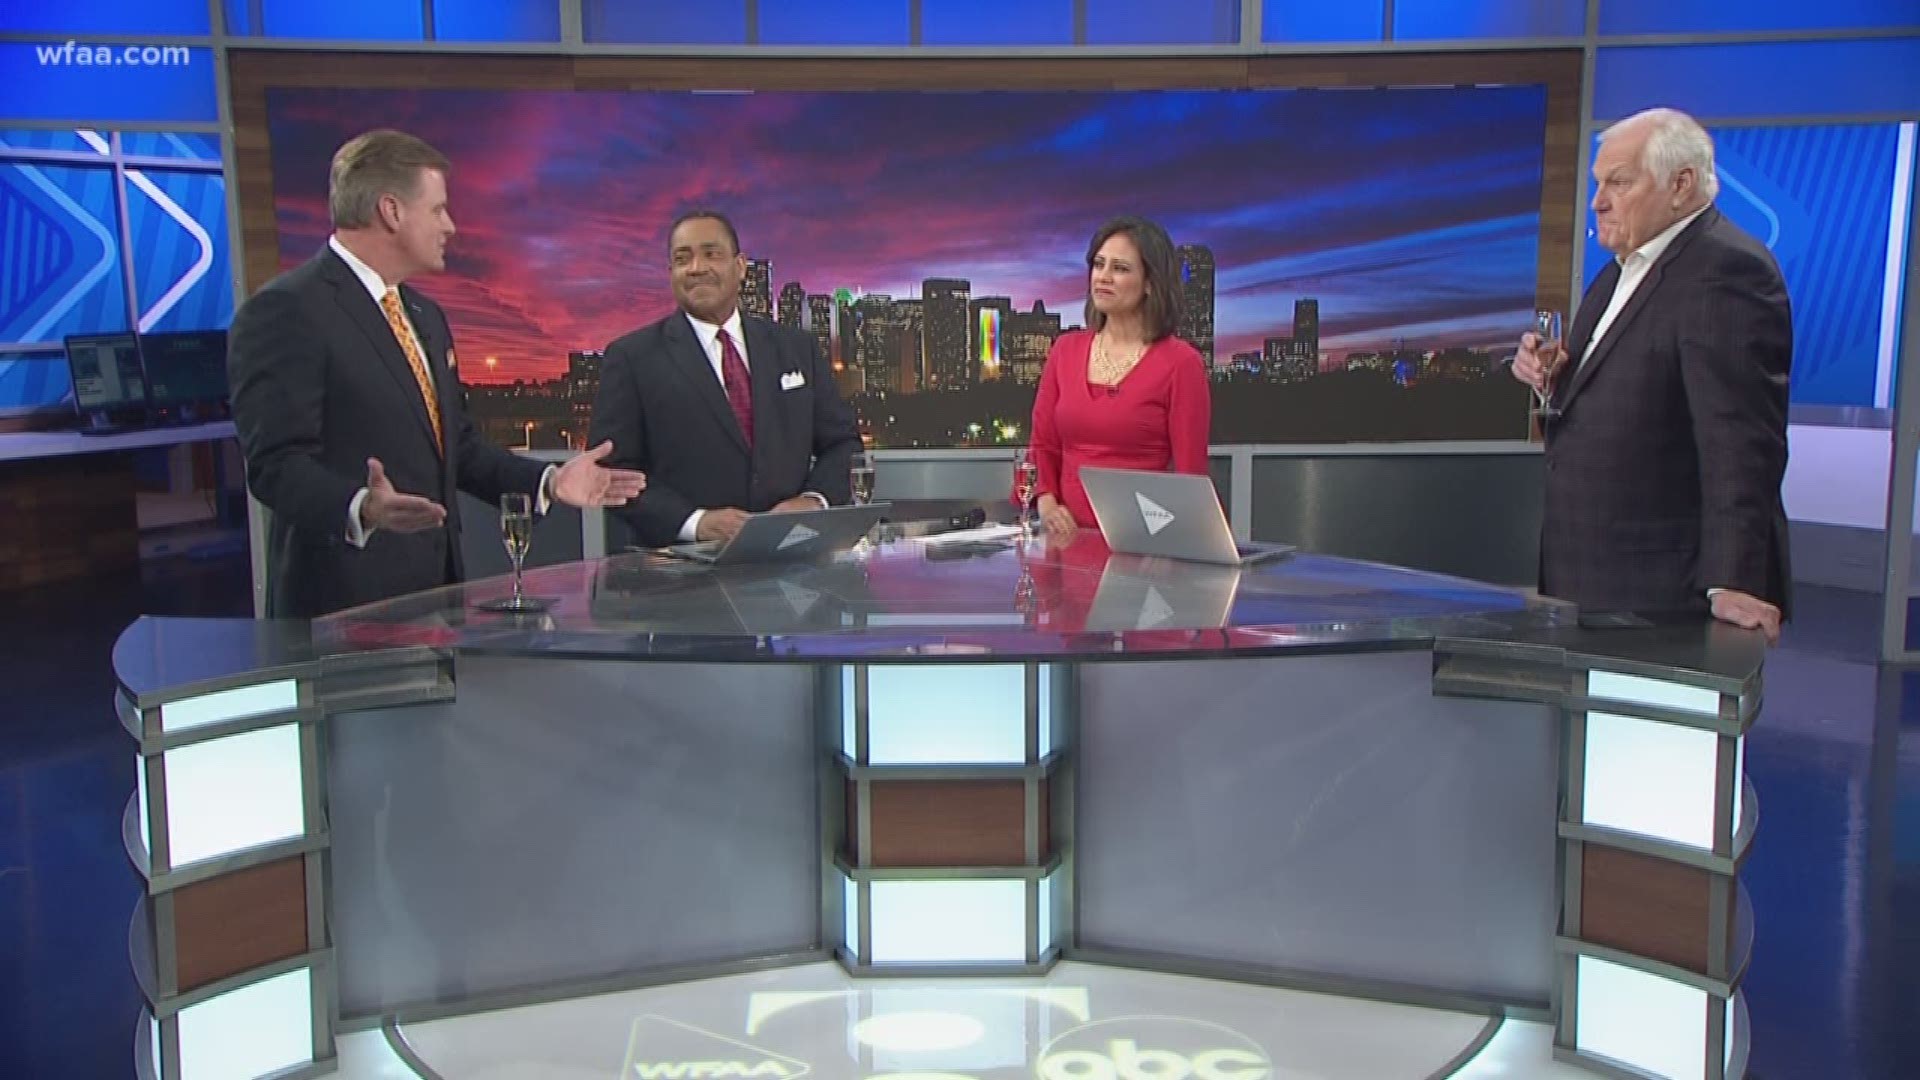 The WFAA 10 p.m. crew shares favorite stories and gives a toast as John McCaa signs off.